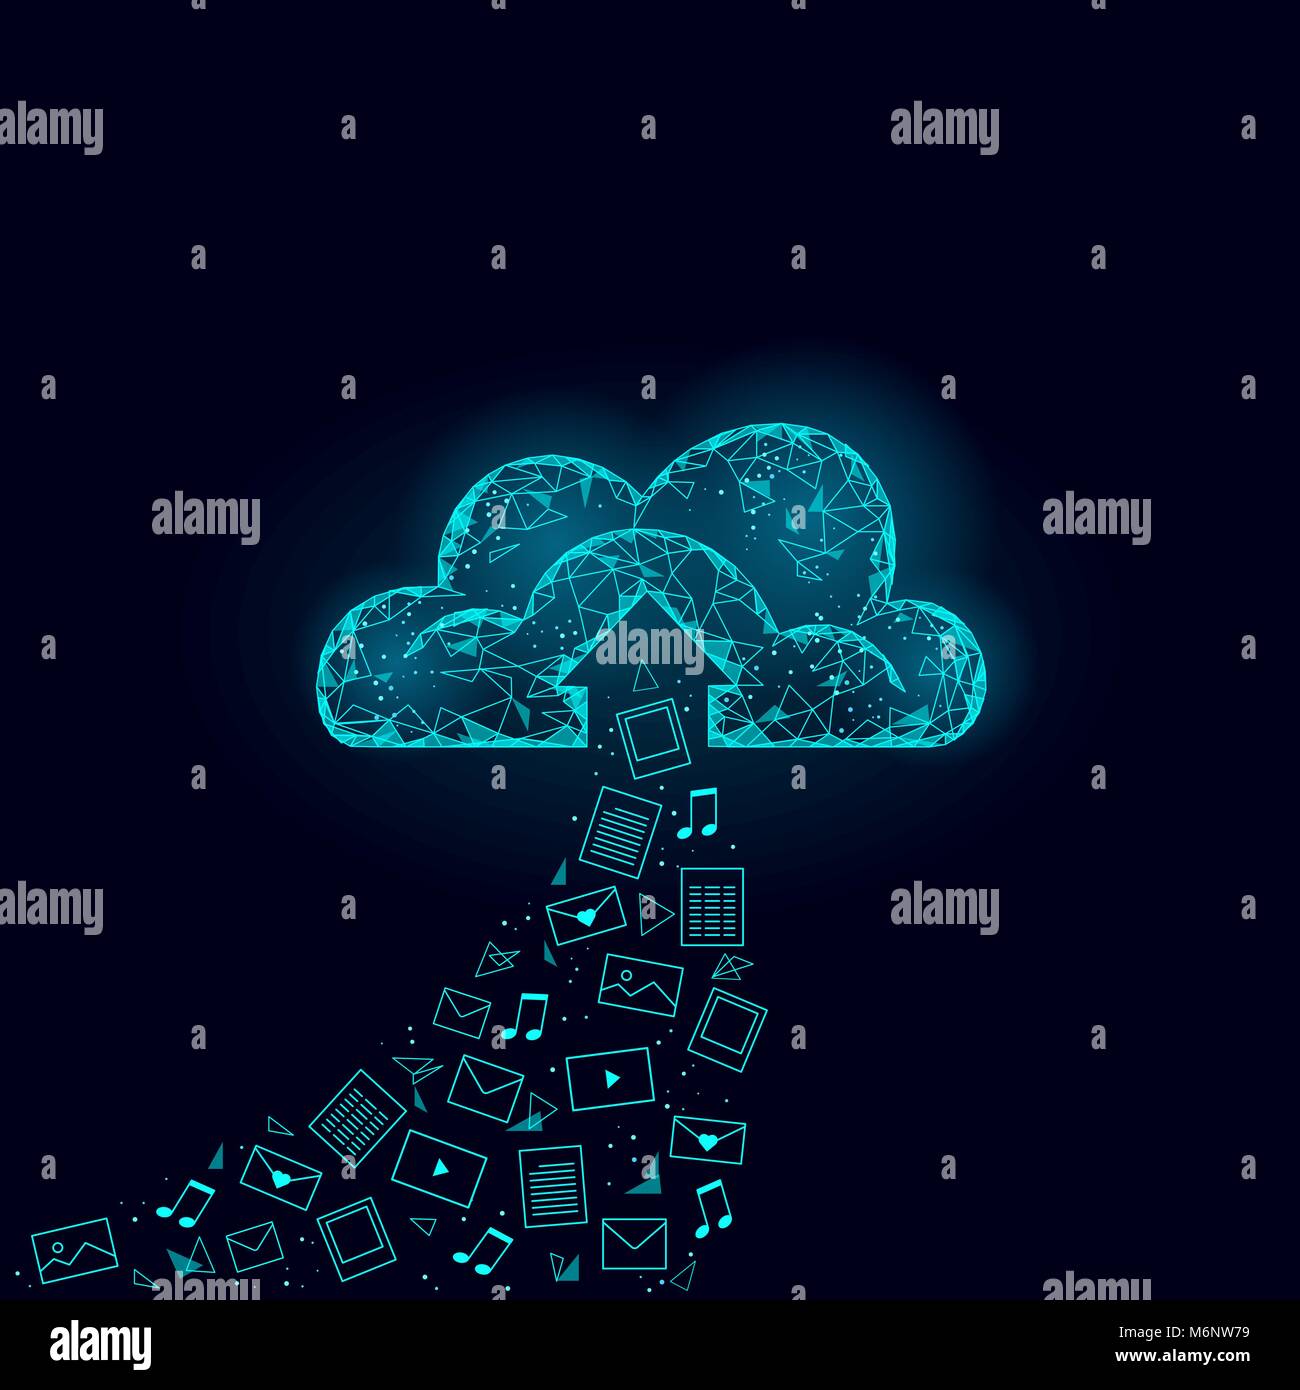 Cloud computing online storage low poly. Polygonal future modern internet business technology. Blue glowing global data information exchange folder file icon Stock Vector